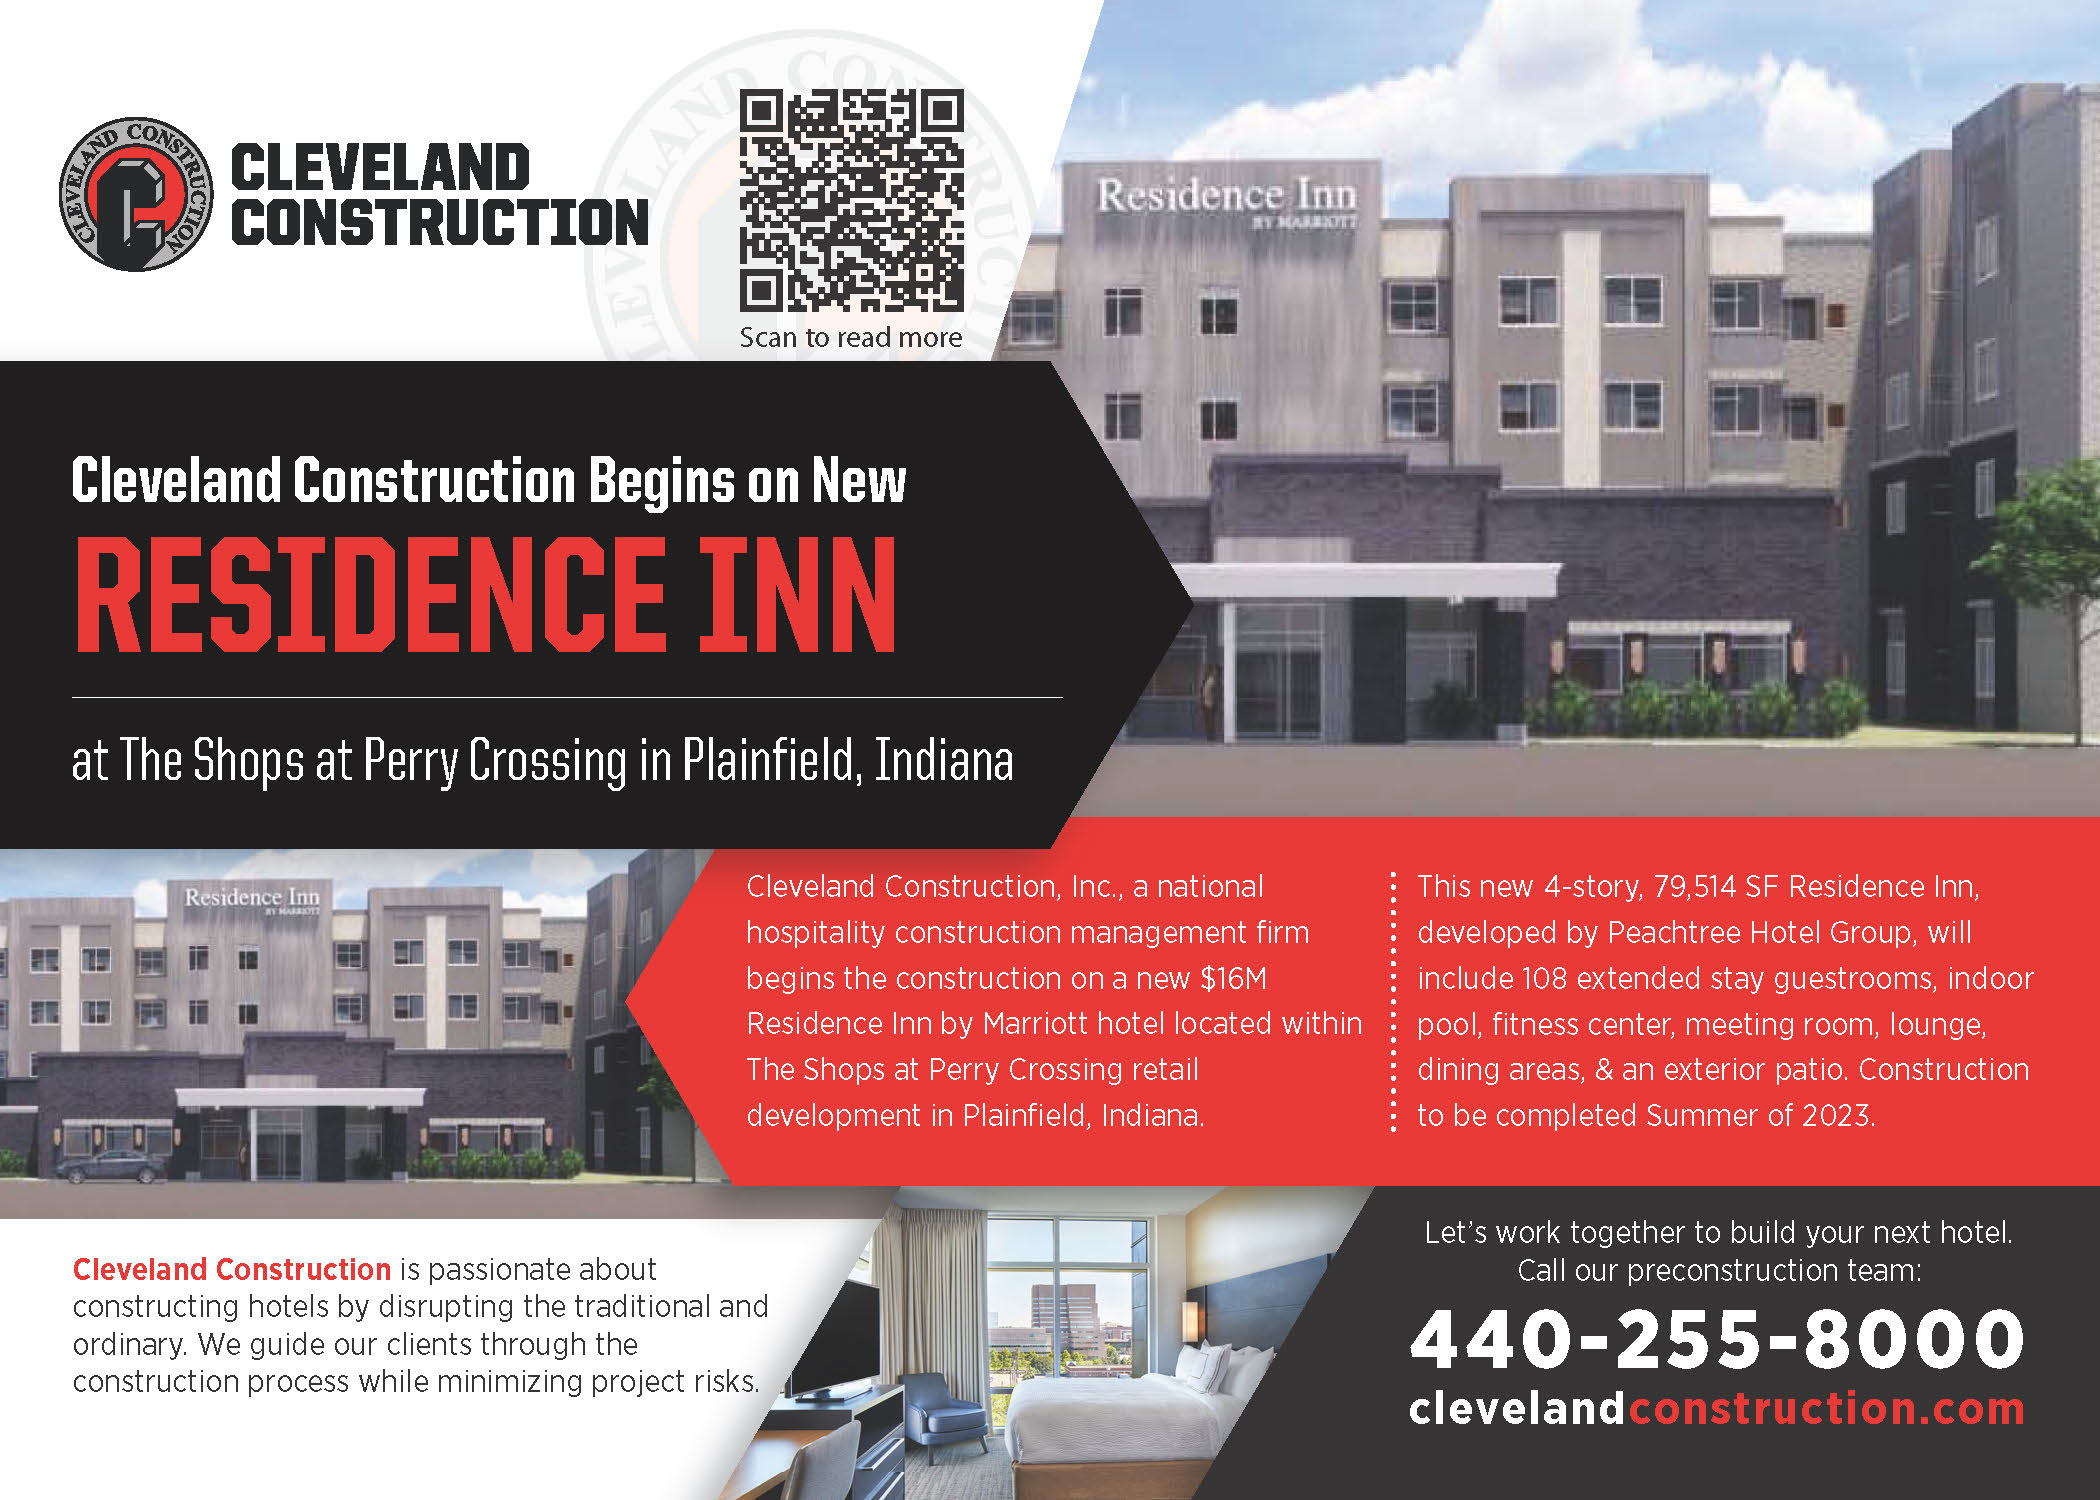 Construction Begins on Residence Inn in Plainfield, Indiana